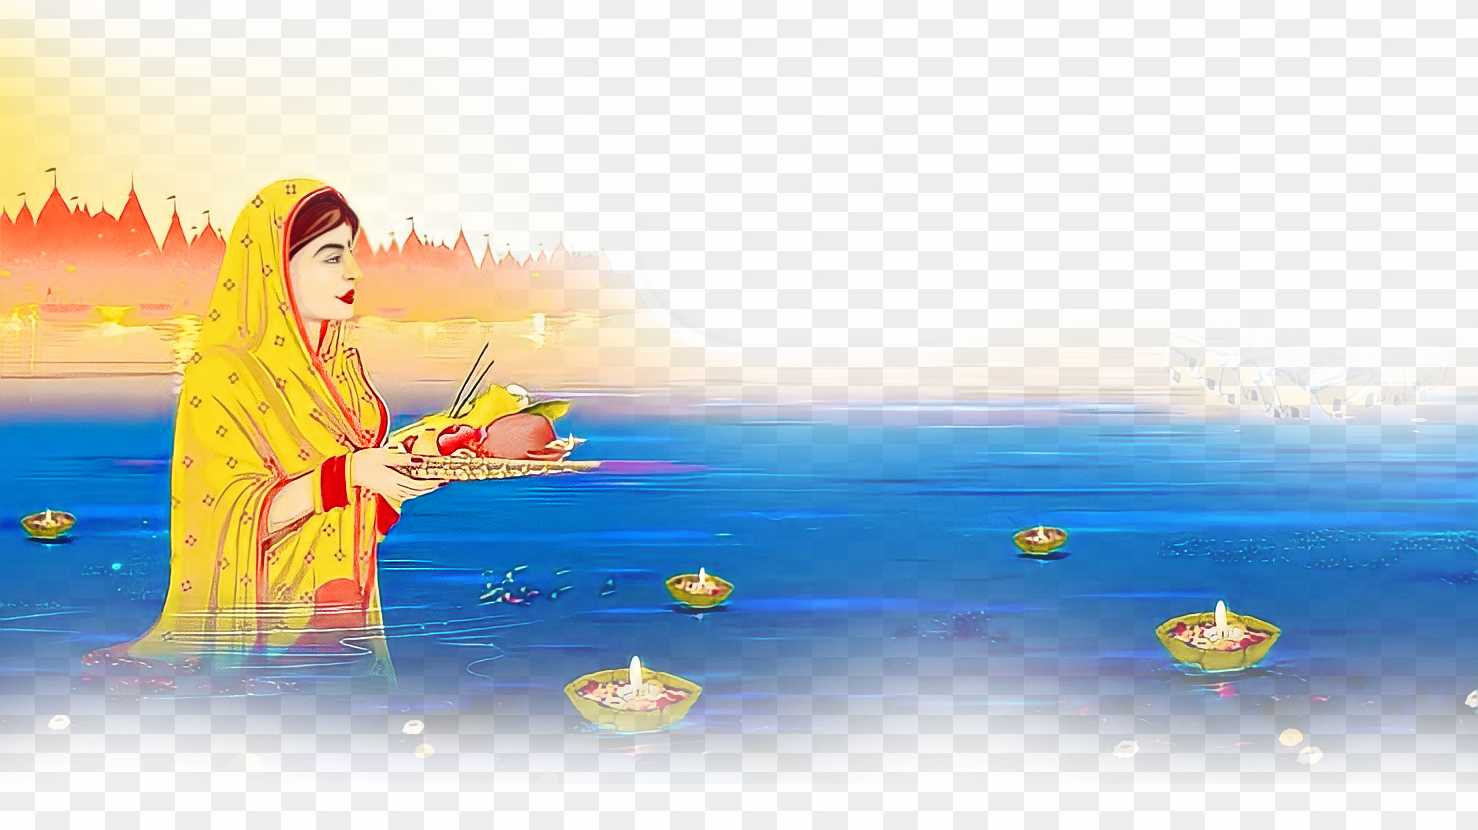 Chhath puja background free transparent PNG Image